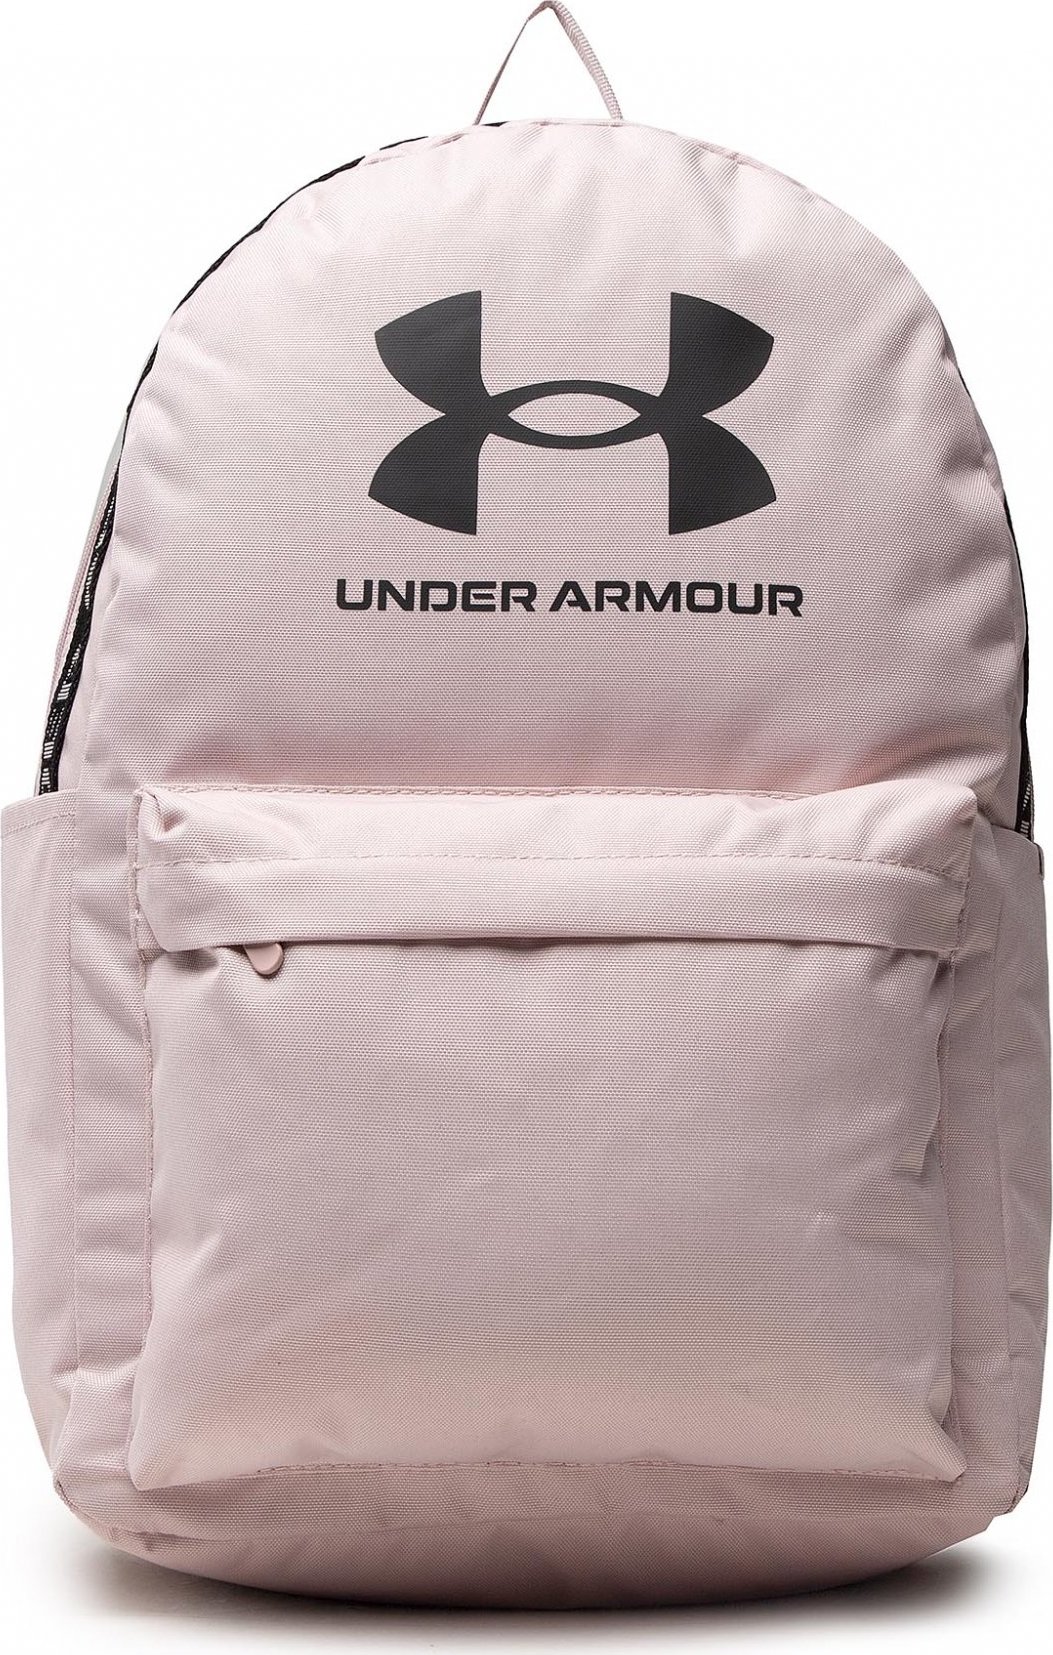 Under Armour Loudon Backpack 1364186-667